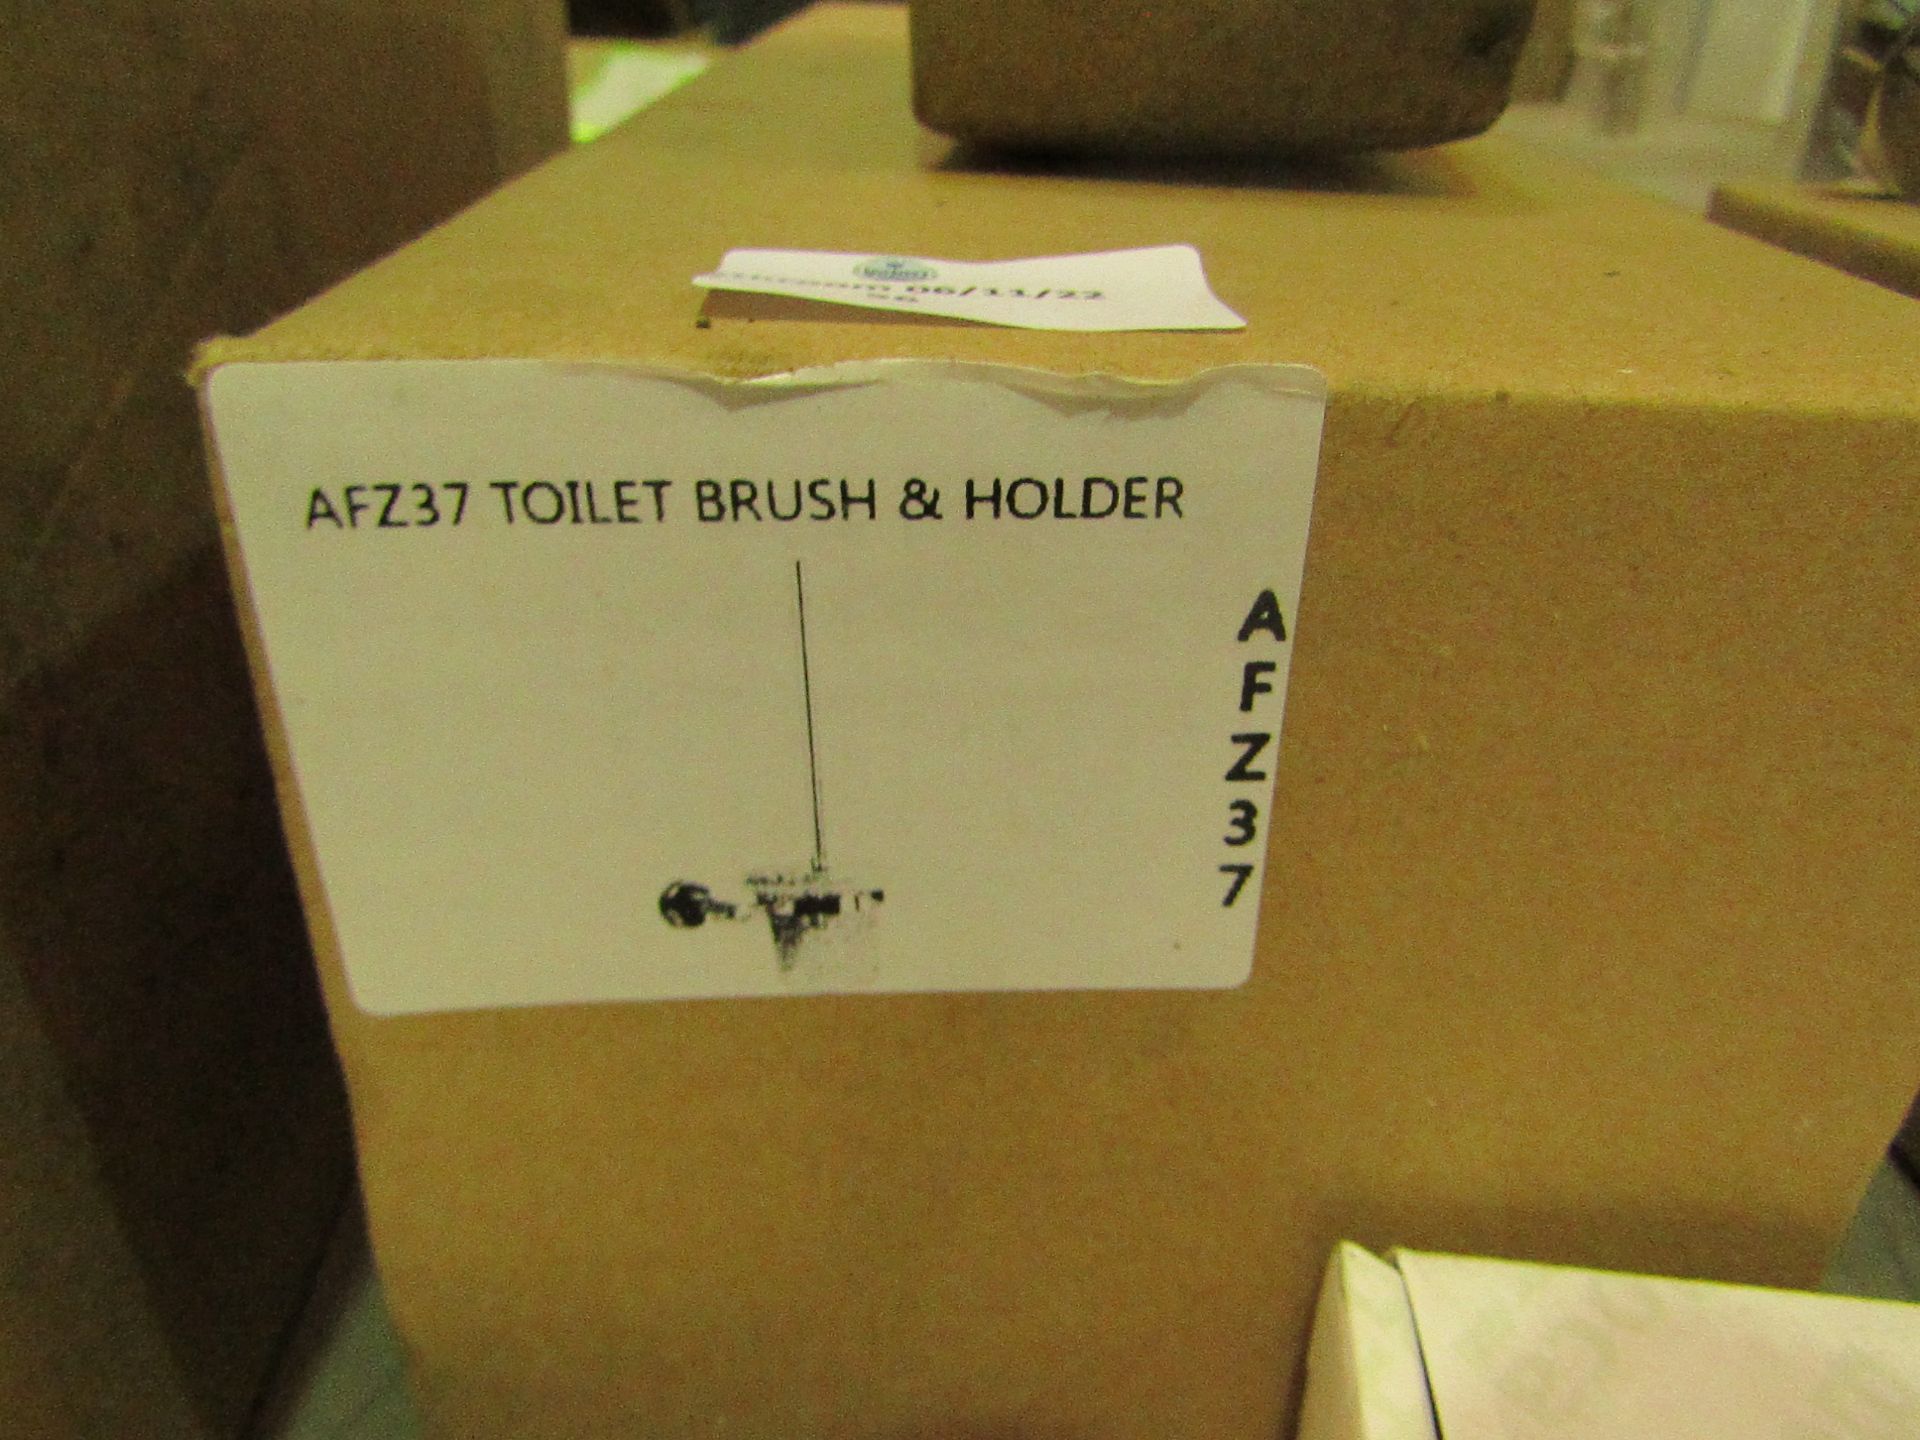 Wall mounted Toilet brush holder and brush, new and boxed